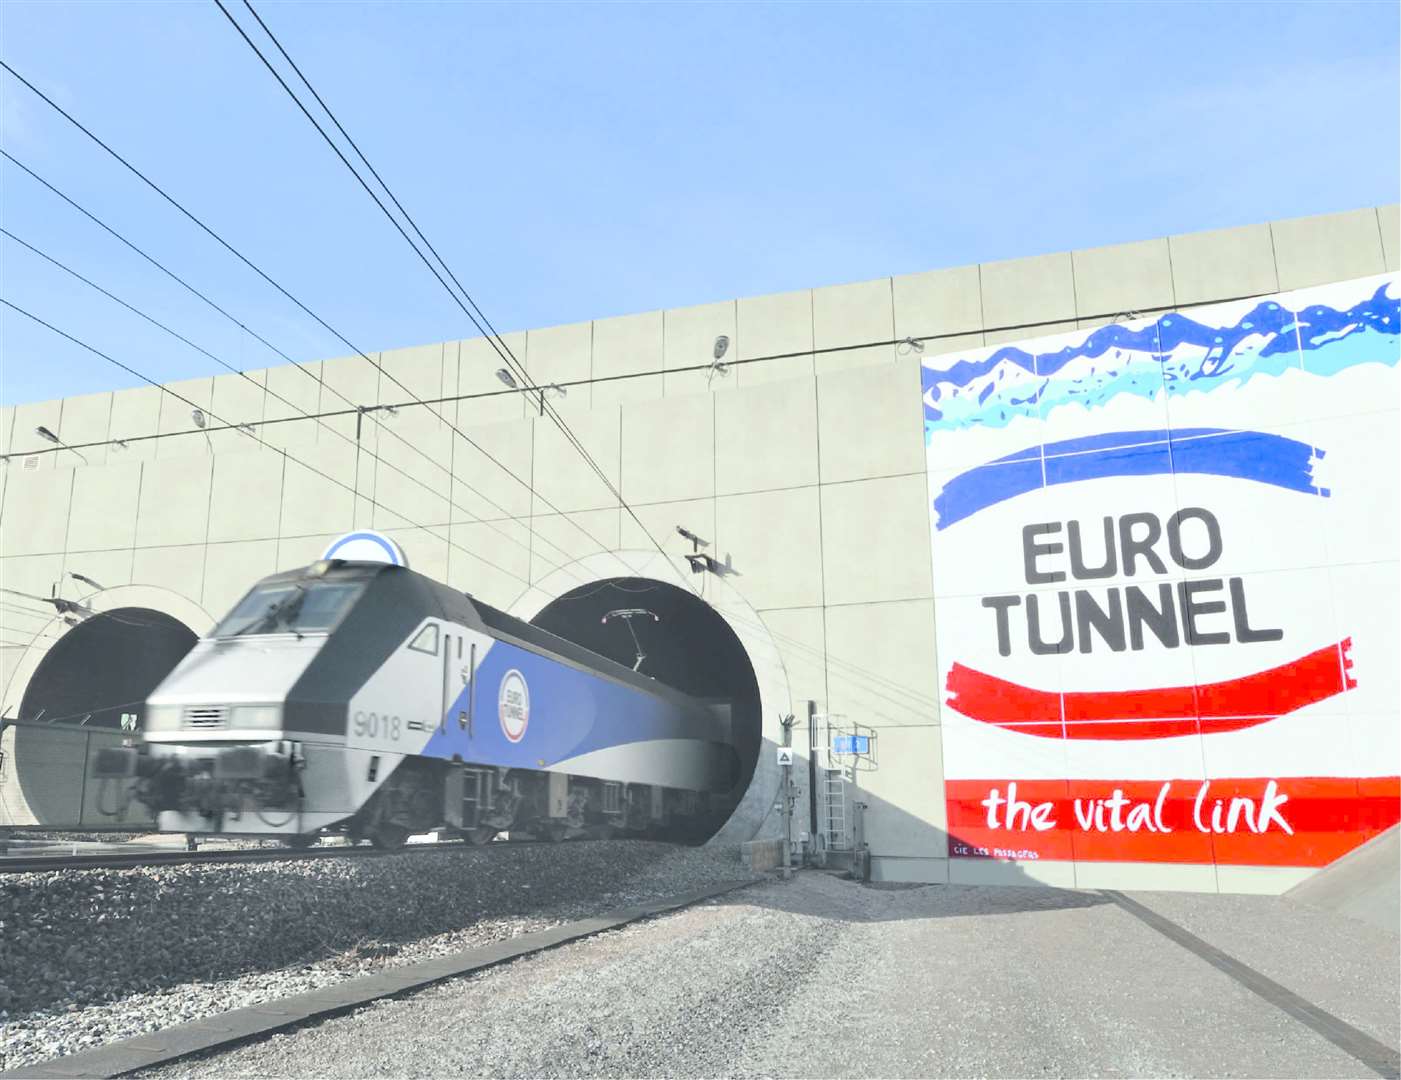 Eurotunnel was awarded £33m by the government to settle a legal dispute